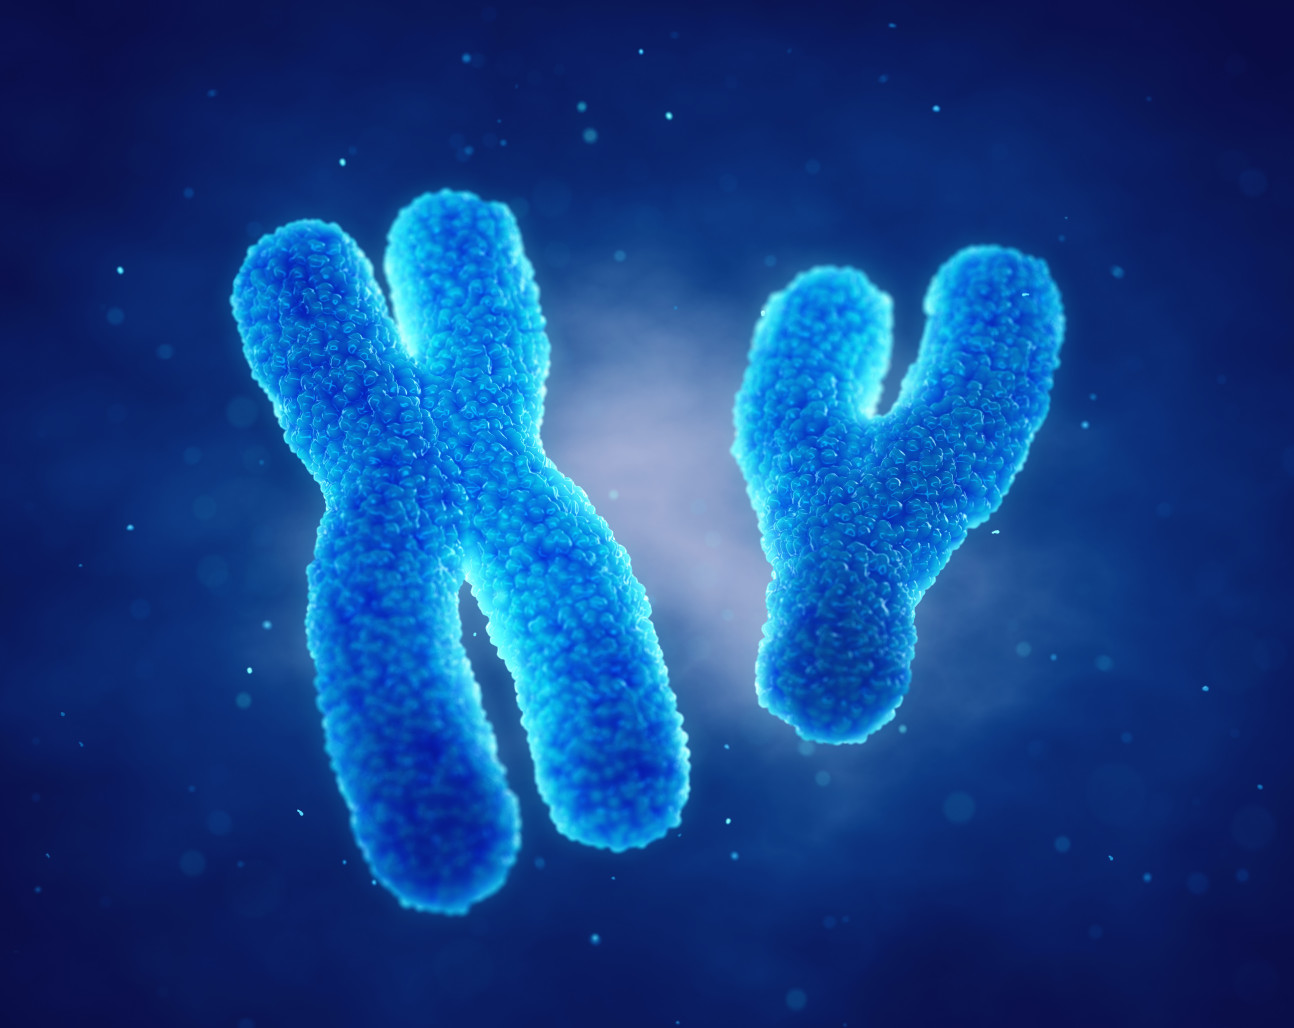 An illustration of X and Y chromosomes